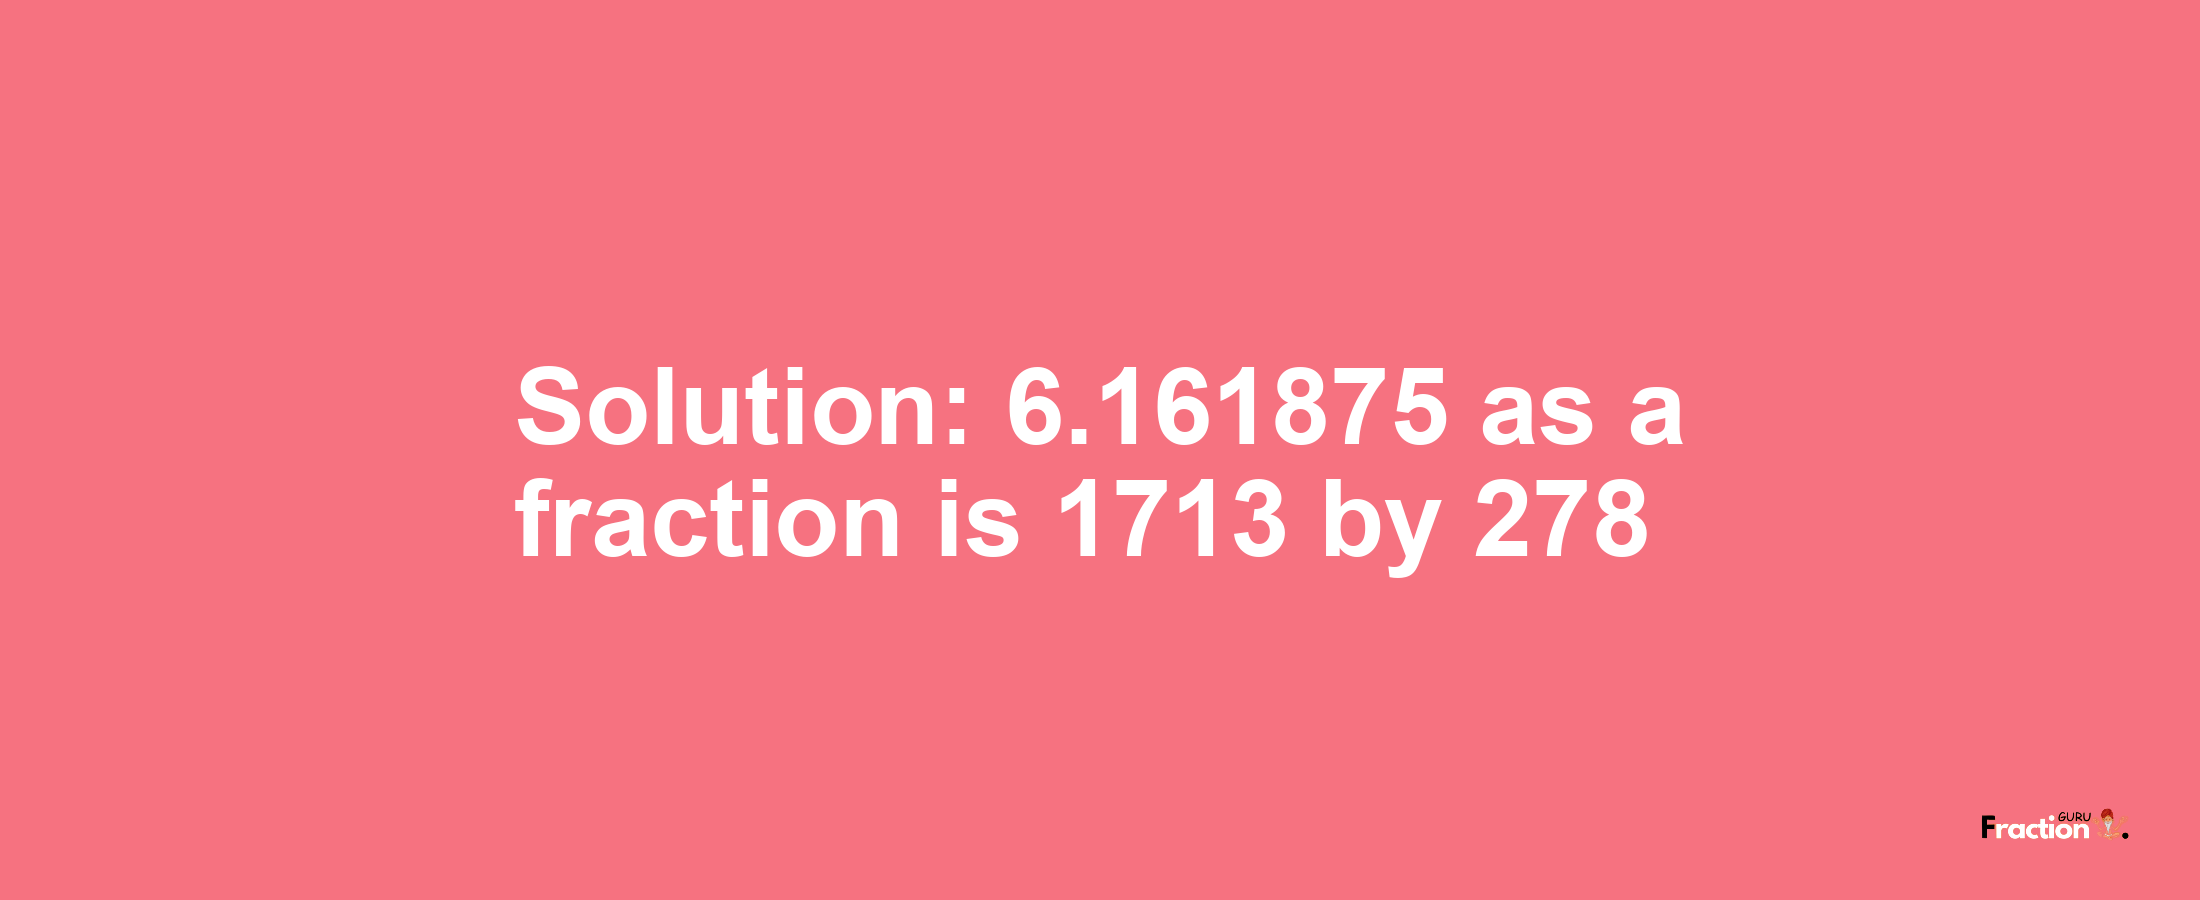 Solution:6.161875 as a fraction is 1713/278